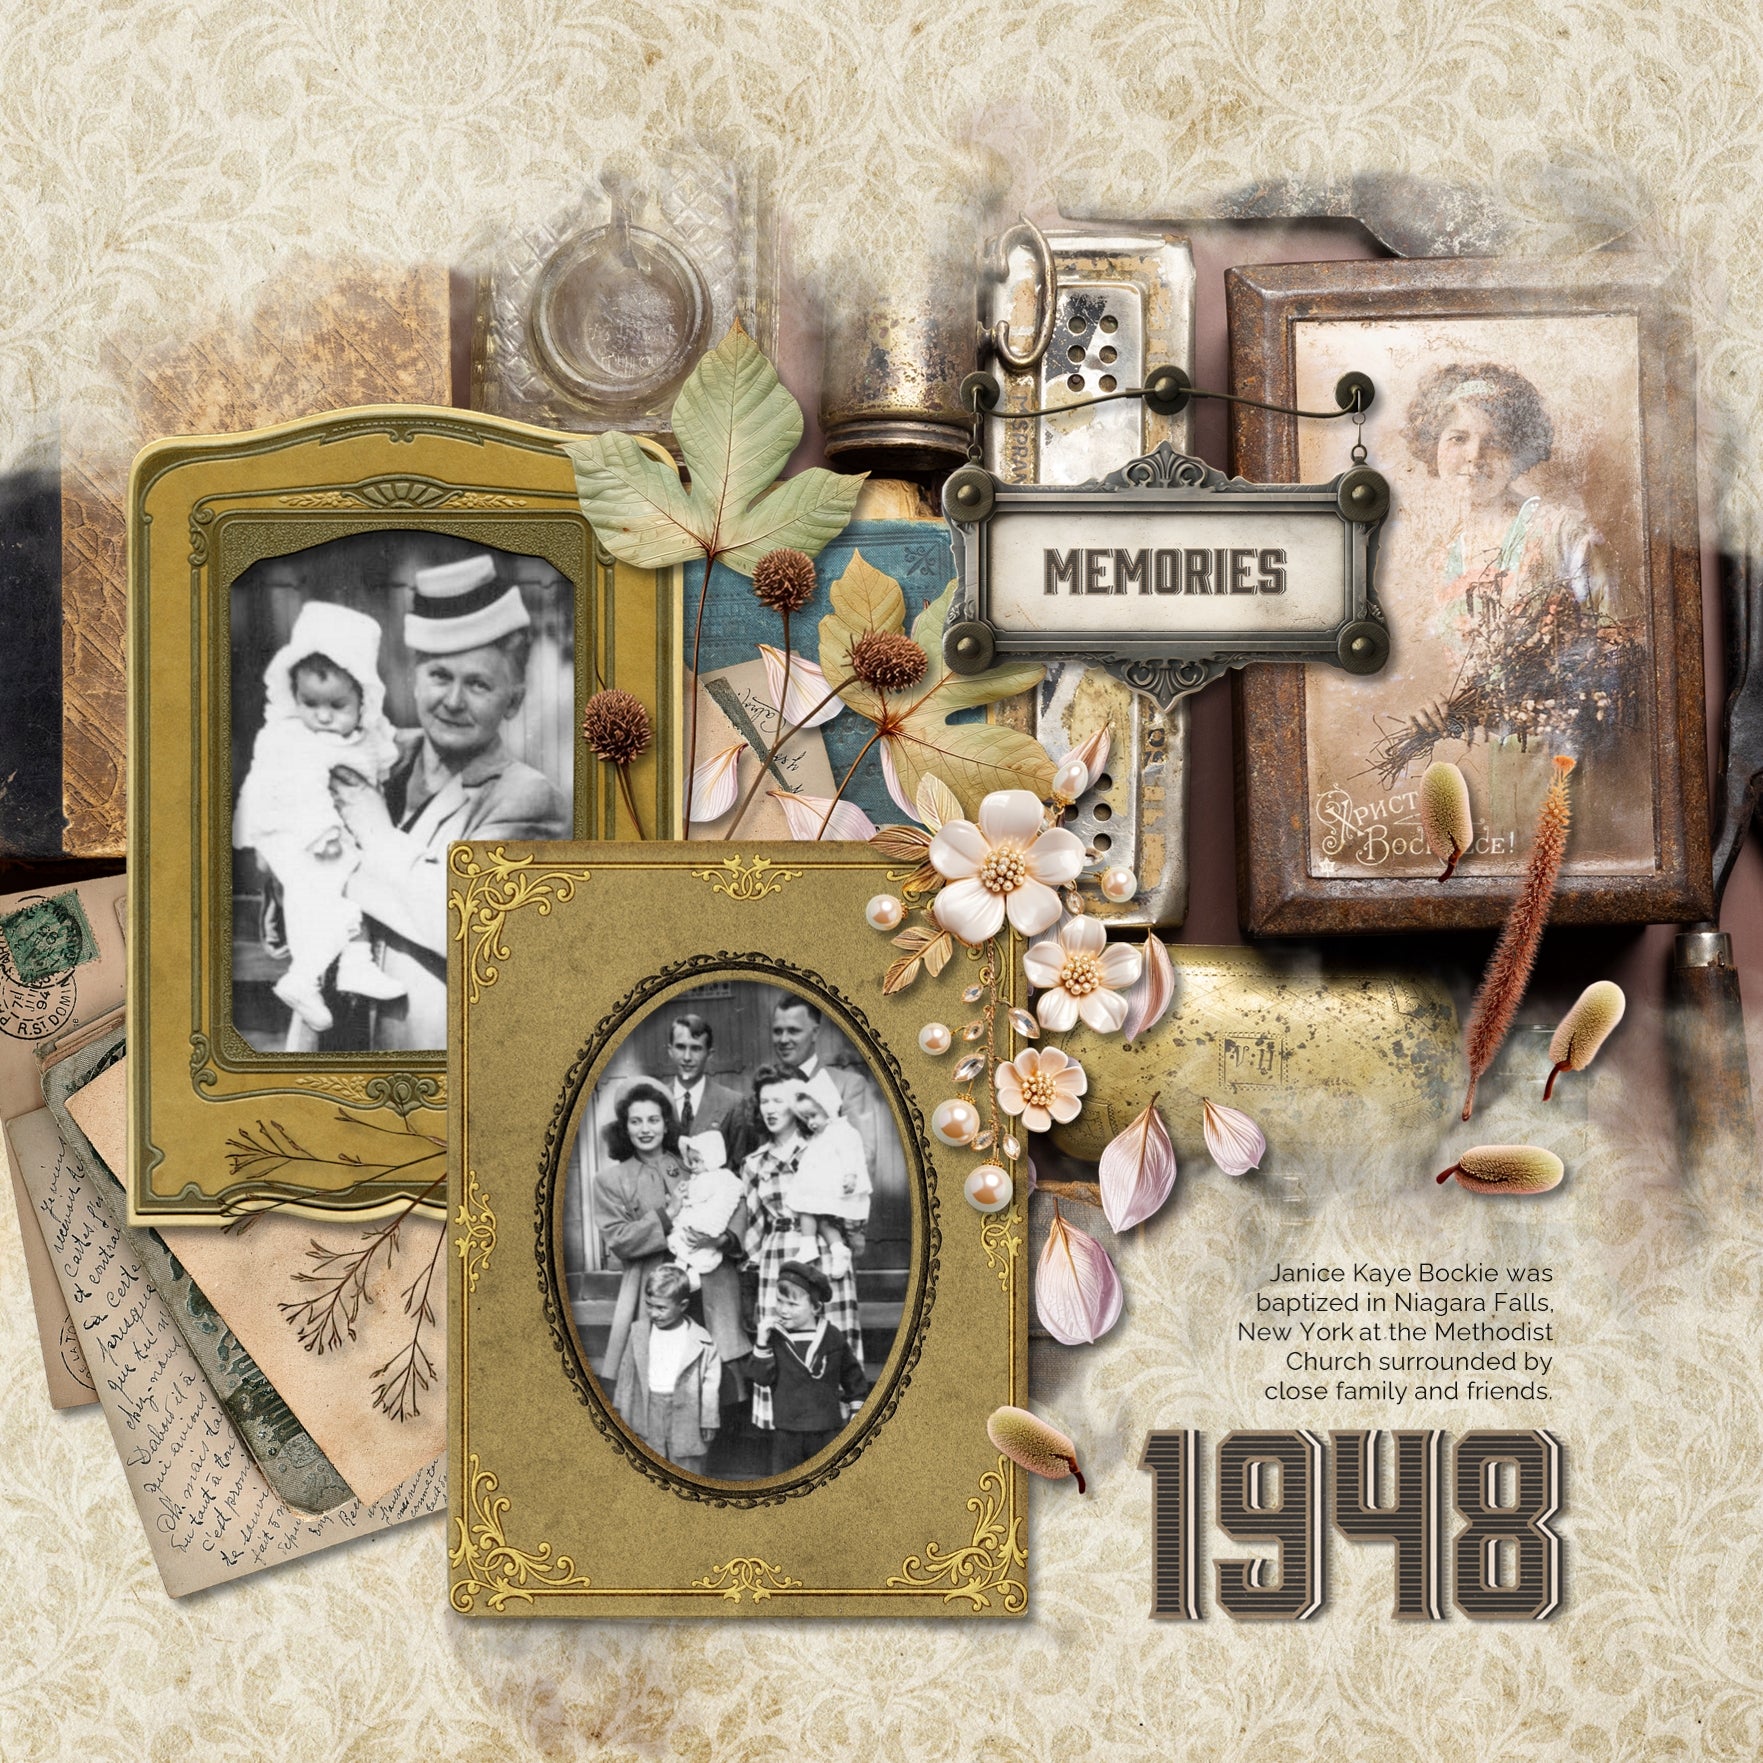 Great for genealogy and family history albums and keepsake digital art pages, these beautiful vintage memorabilia overlays with transparent edges by Lucky Girl Creative blend seamlessly into any background paper and make the perfect backdrop for authentic scrapbook pages. Overlays include vintage silverware, kitchen gadgets, camera, vintage photo frames, journals, jewelry box, pocket watch, and other memorabilia.